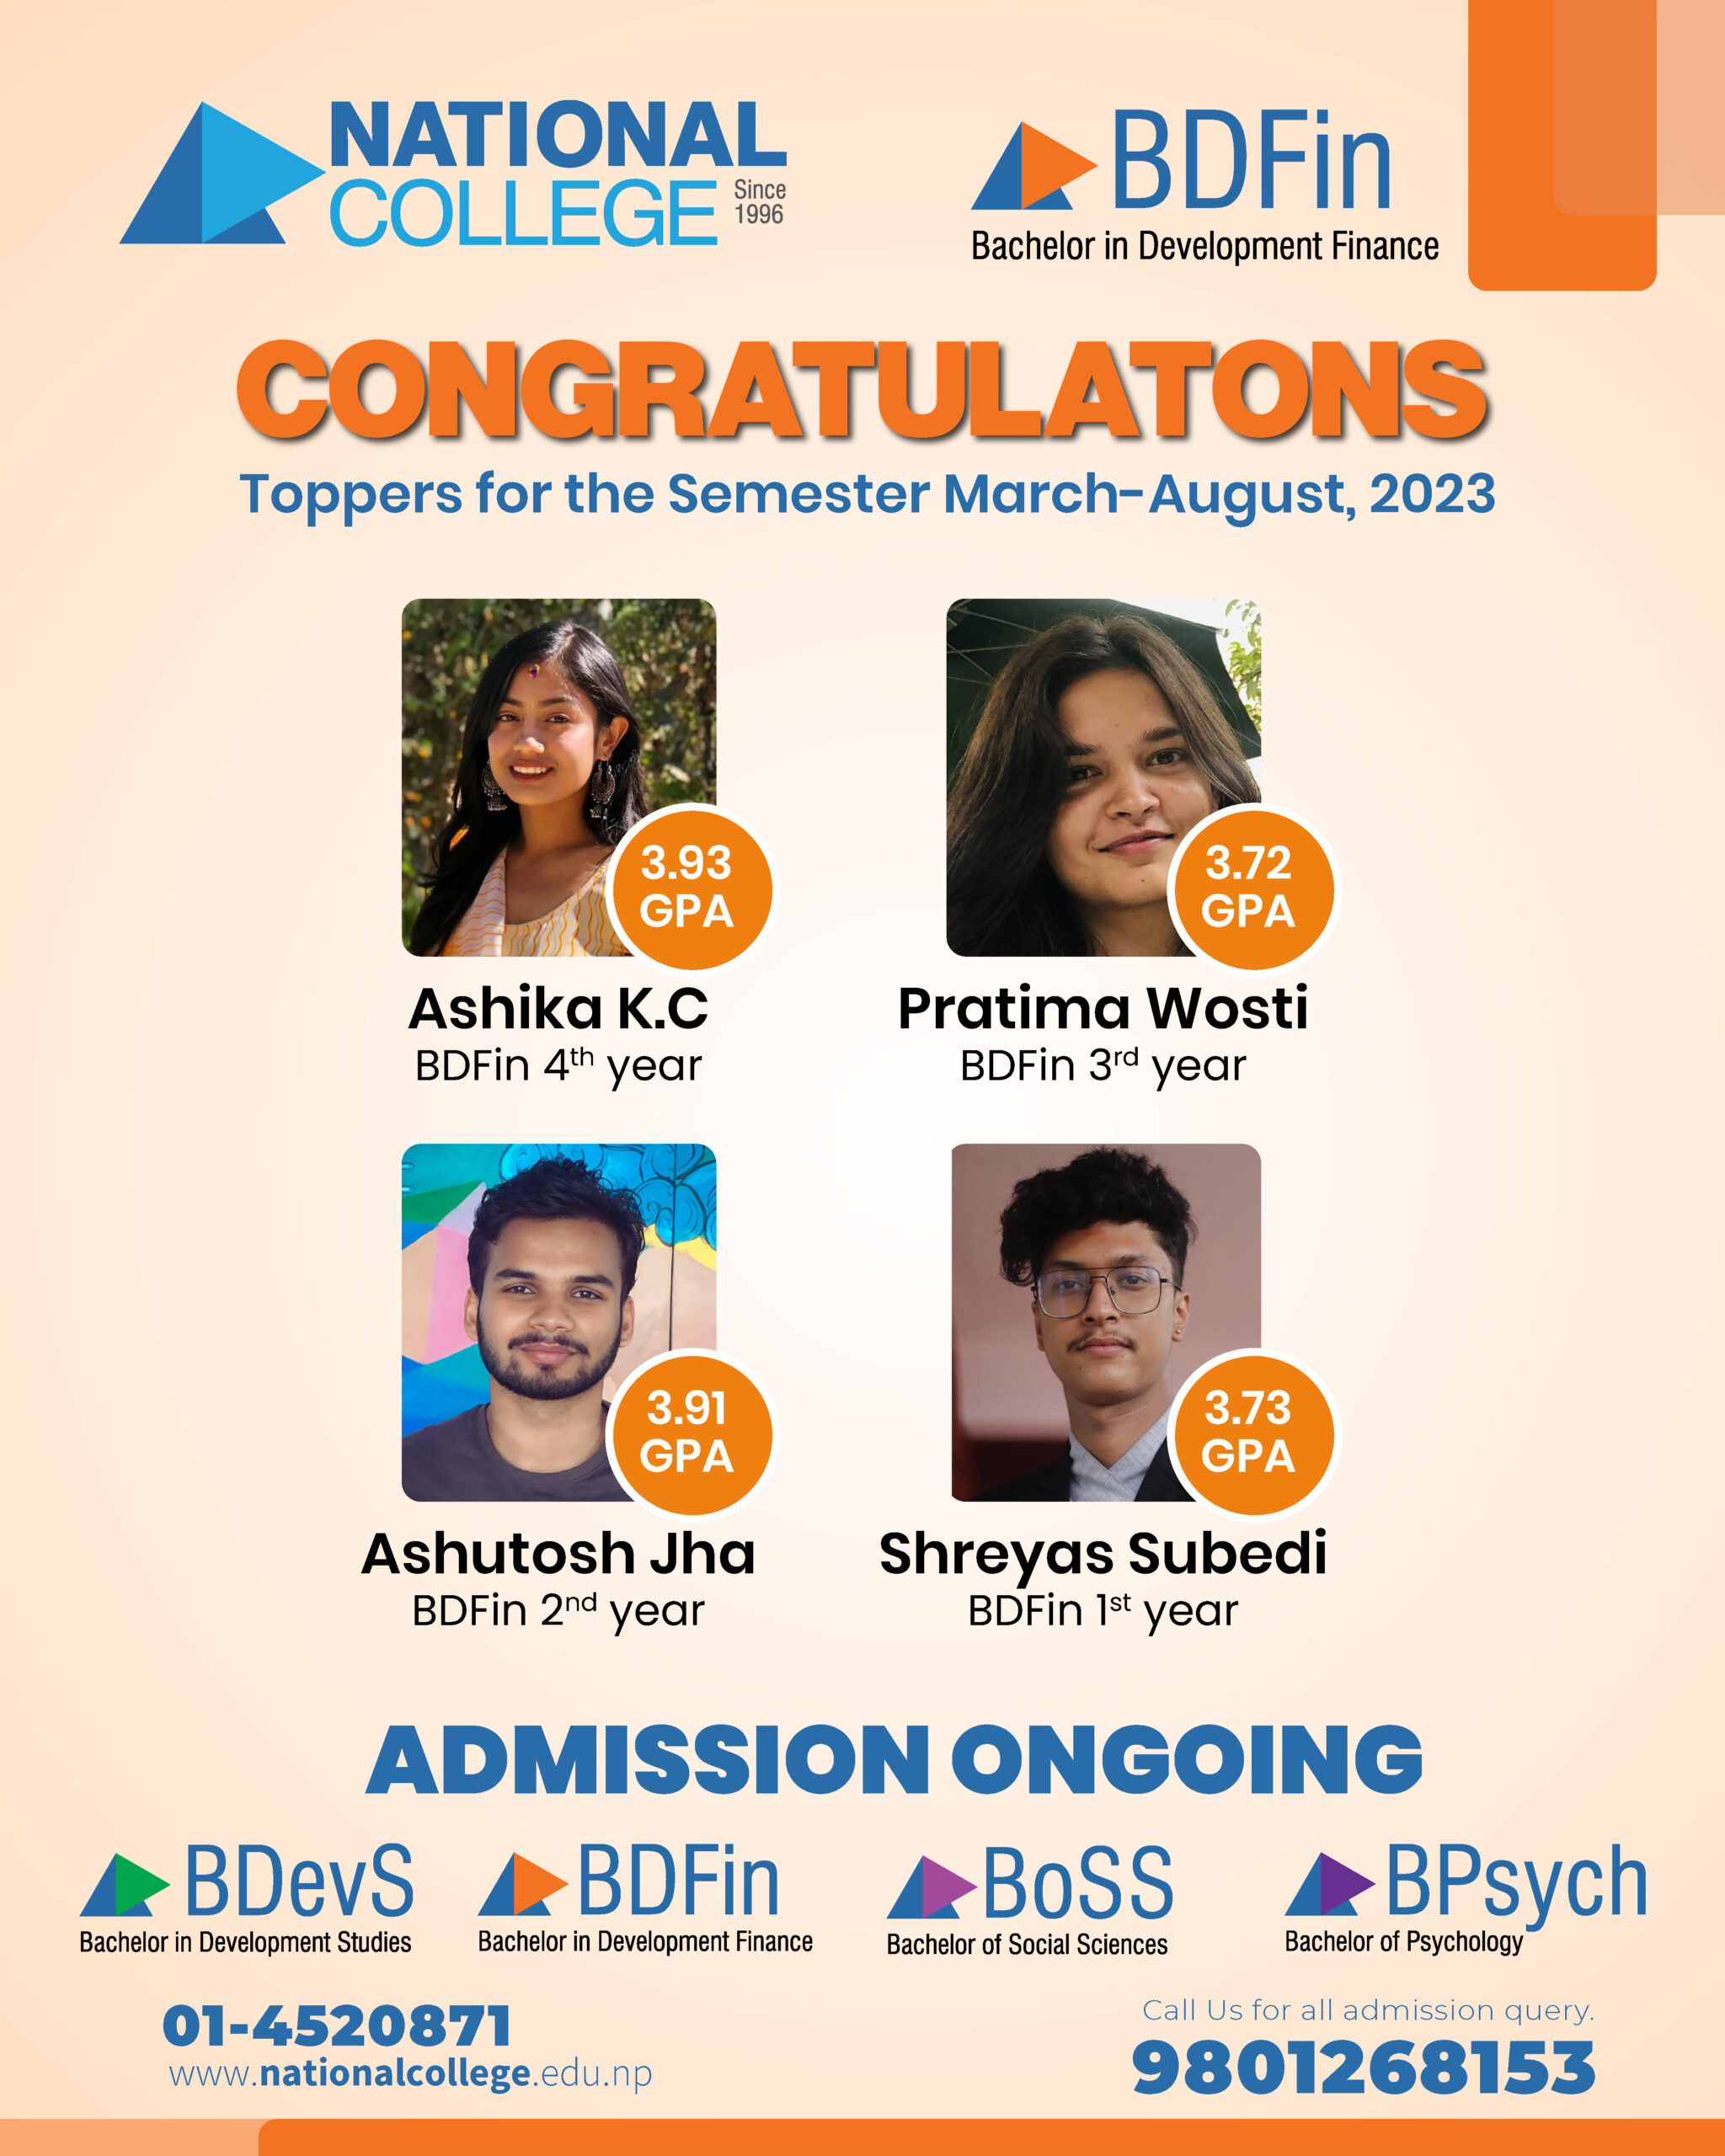 CONGRATULATONS Toppers for the Semester March-August, 2023, #BDFin